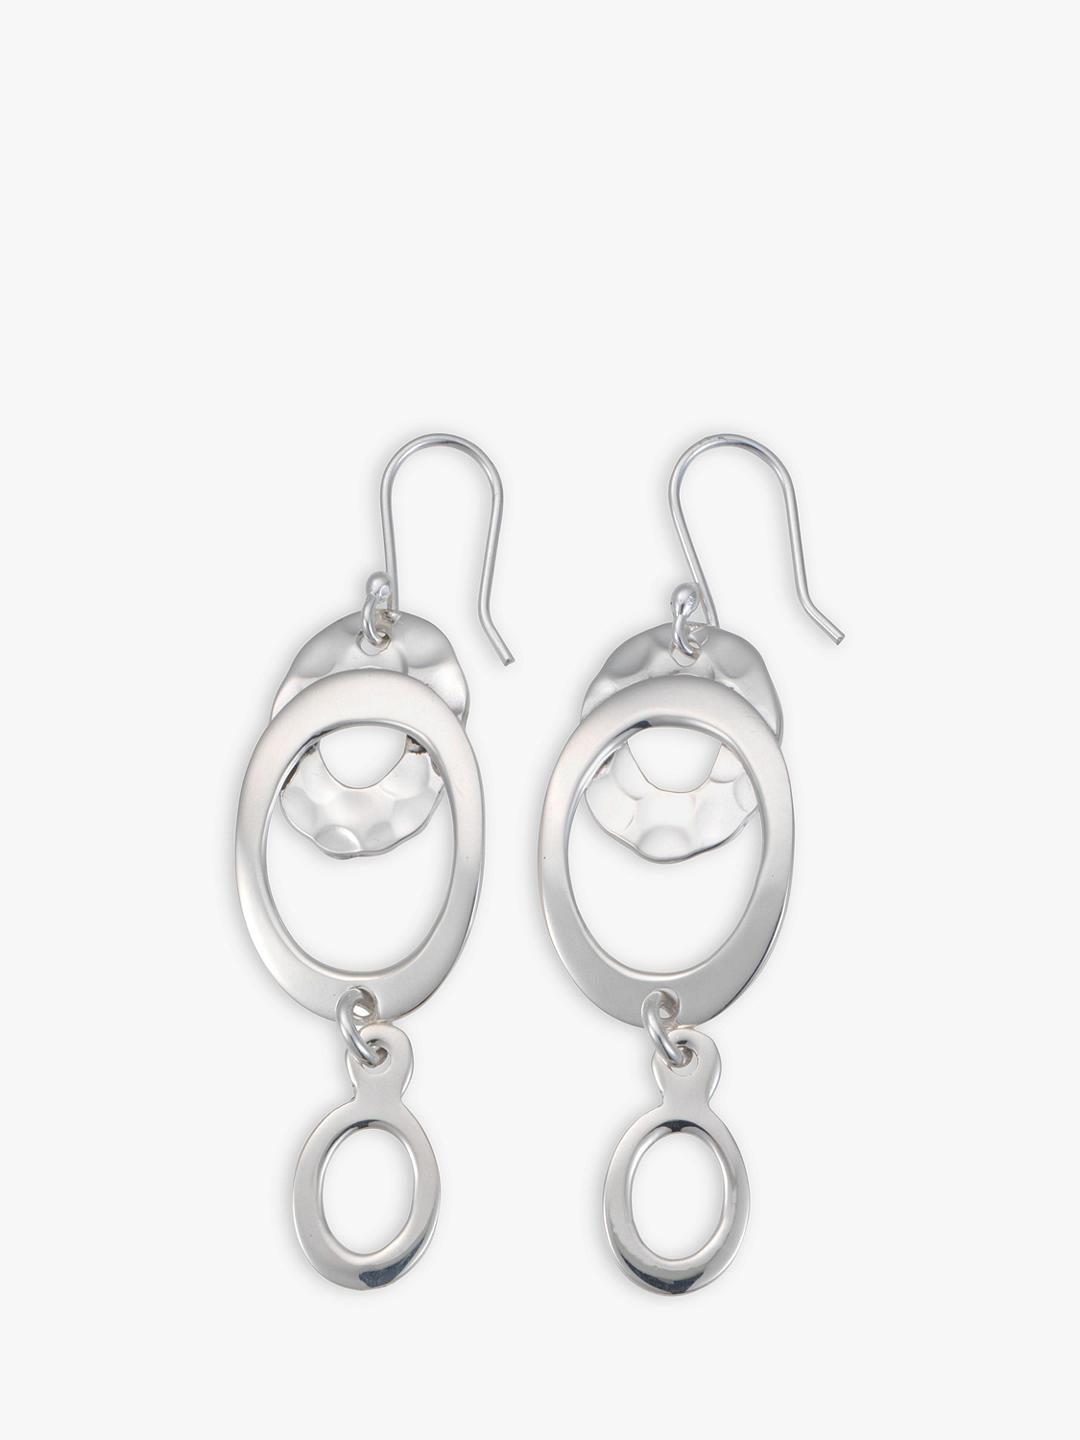 Andea Hammered Open Oval Drop Earrings